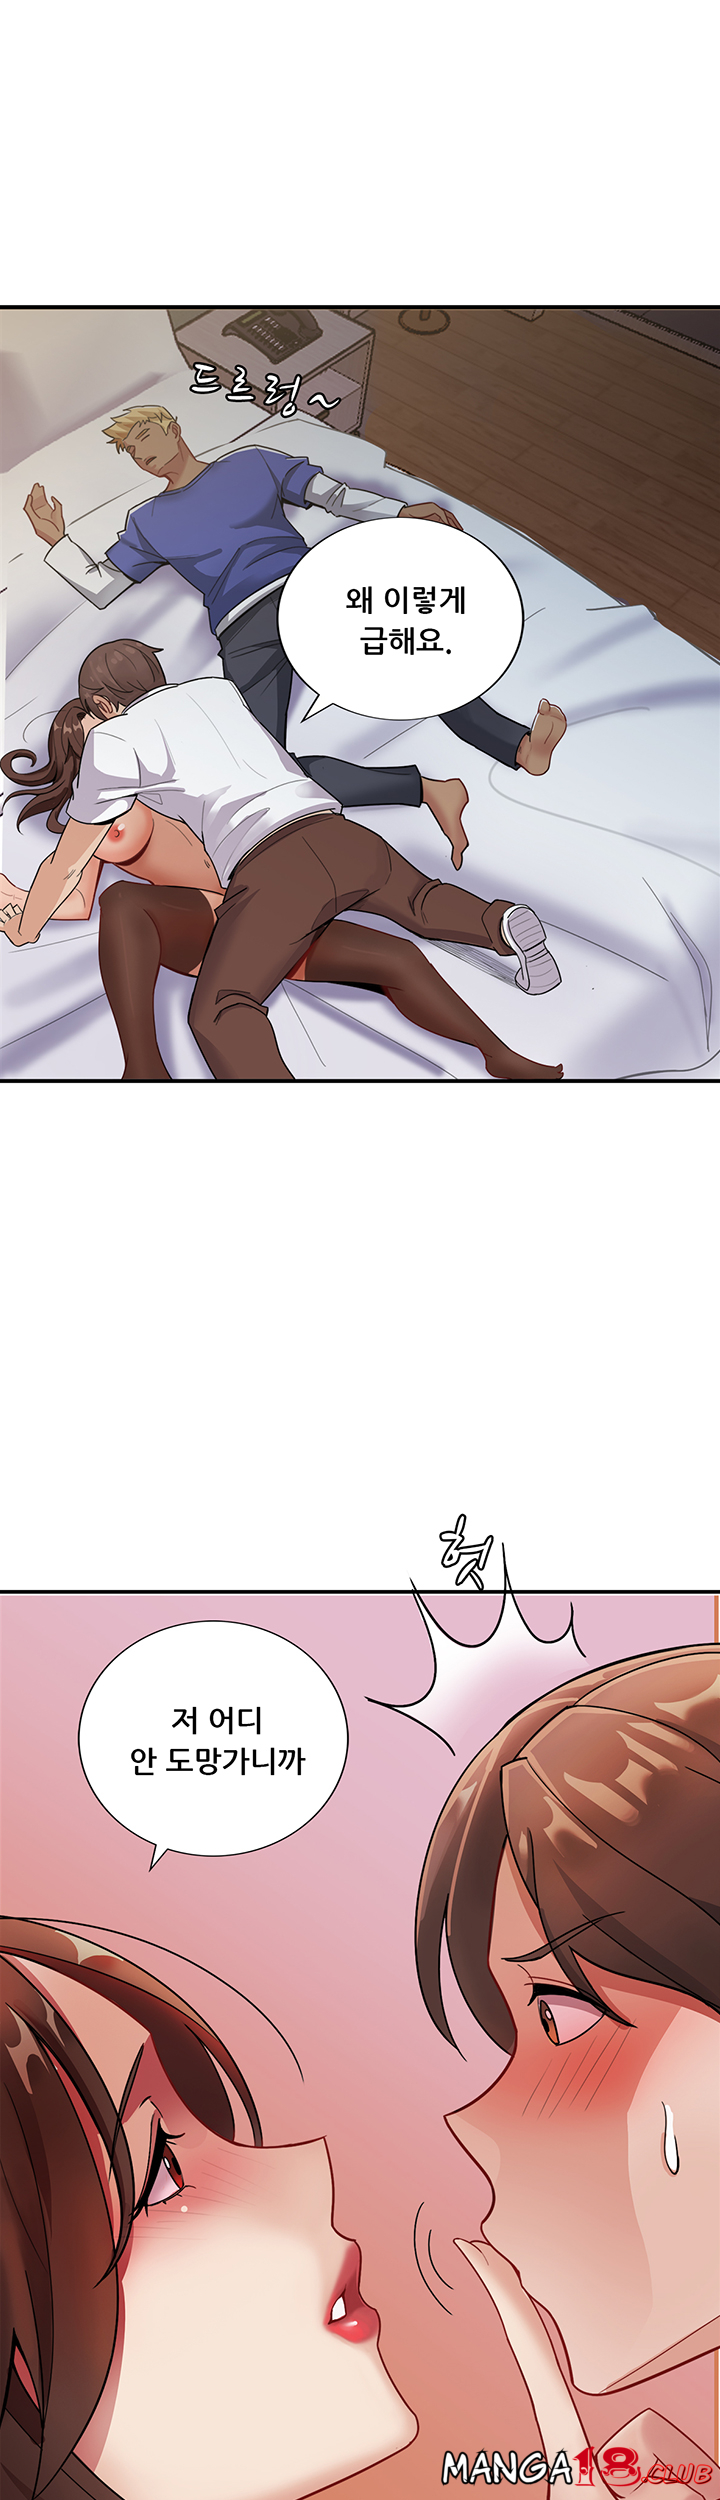 Lover Exchange Raw - Chapter 2 Page 1